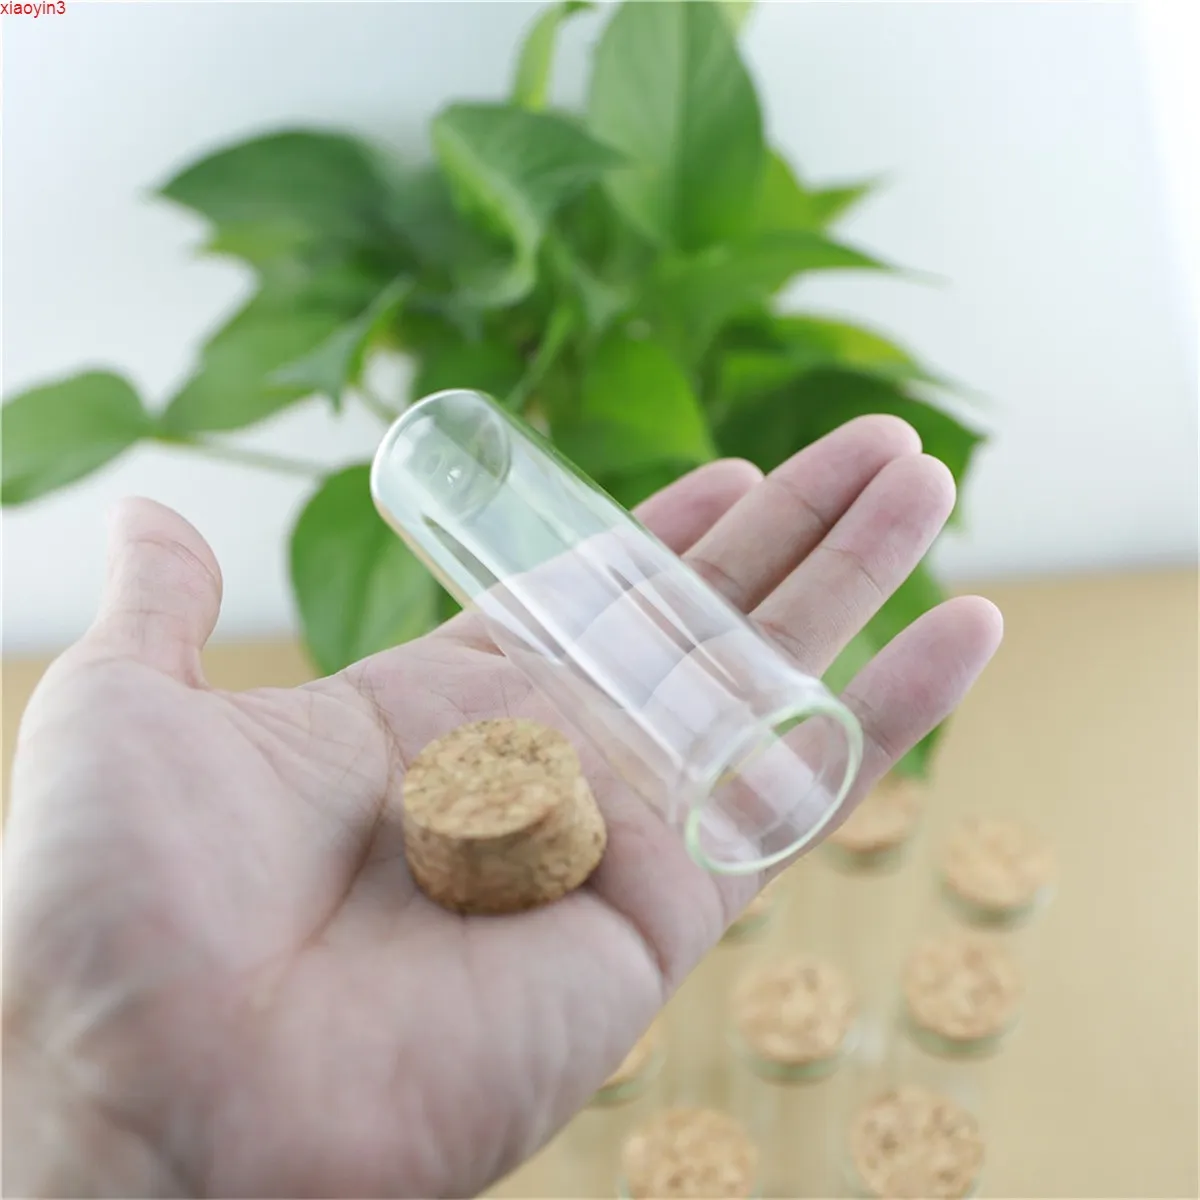 12 Pieces 30*100mm 50ml Corks Glass Bottle Stopper Spicy Storage Container Jars Vial DIY Crafthigh qualtity